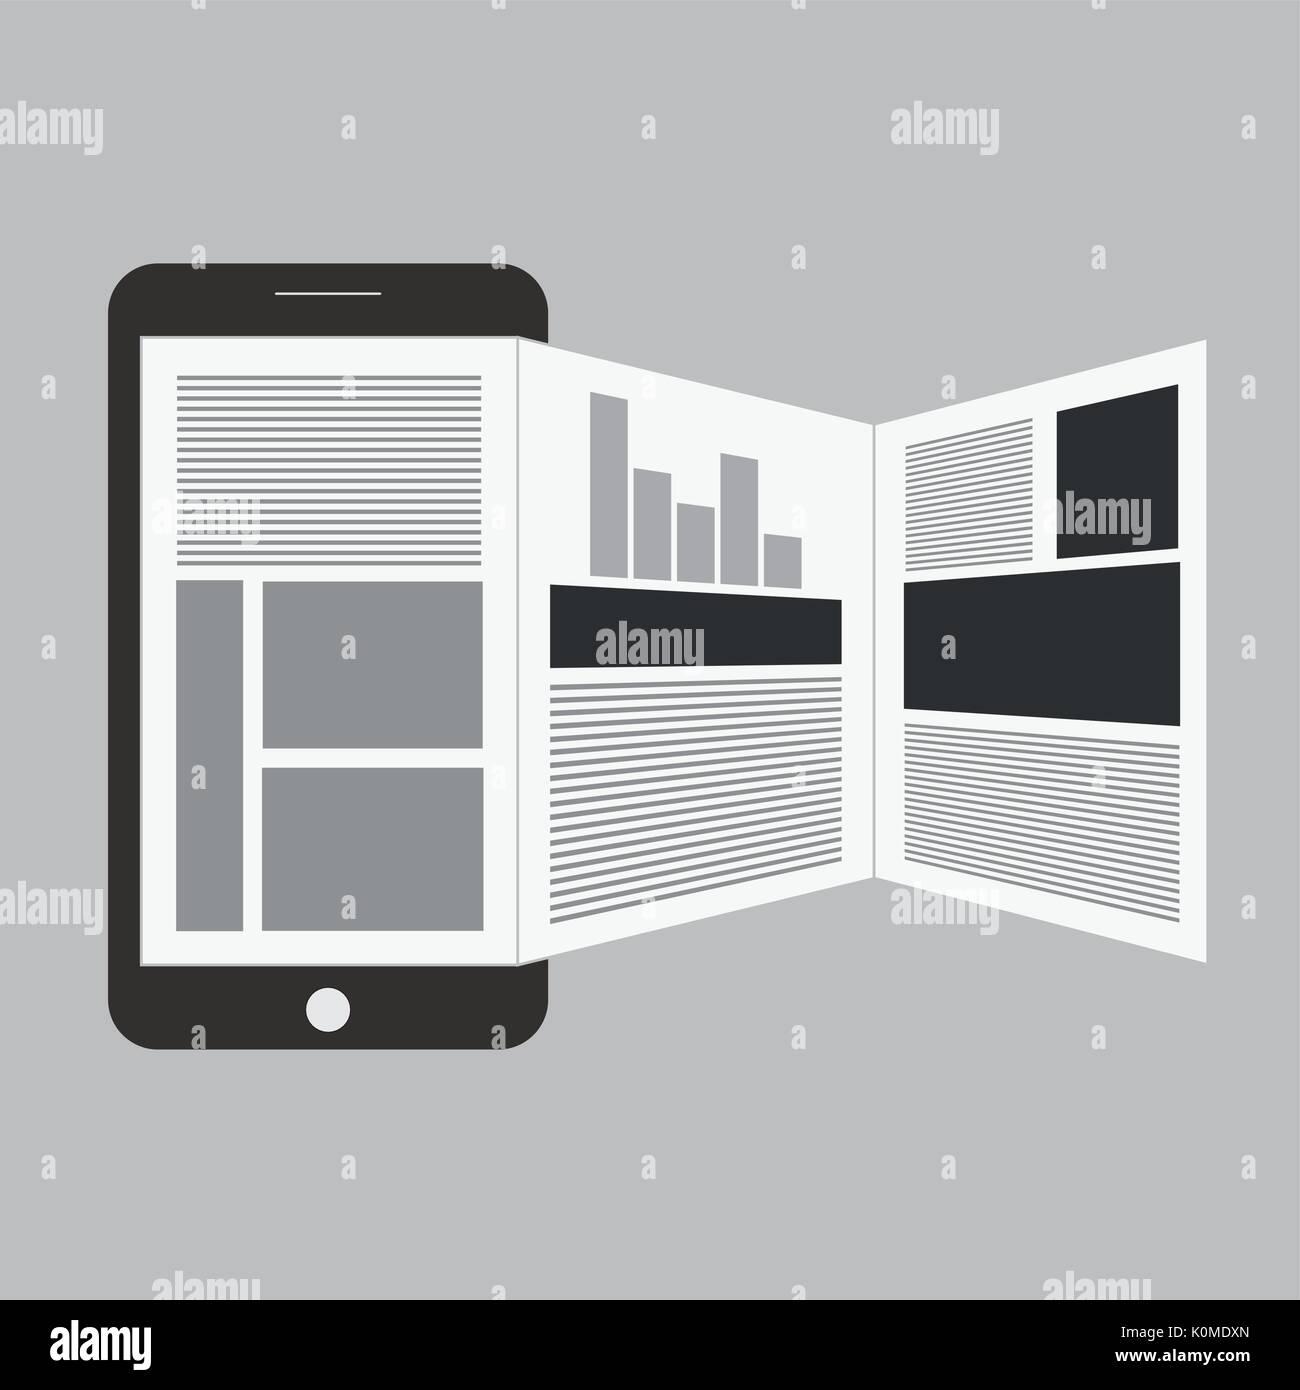 Vector illustration of online reading news or web surfing using smartphone Stock Vector